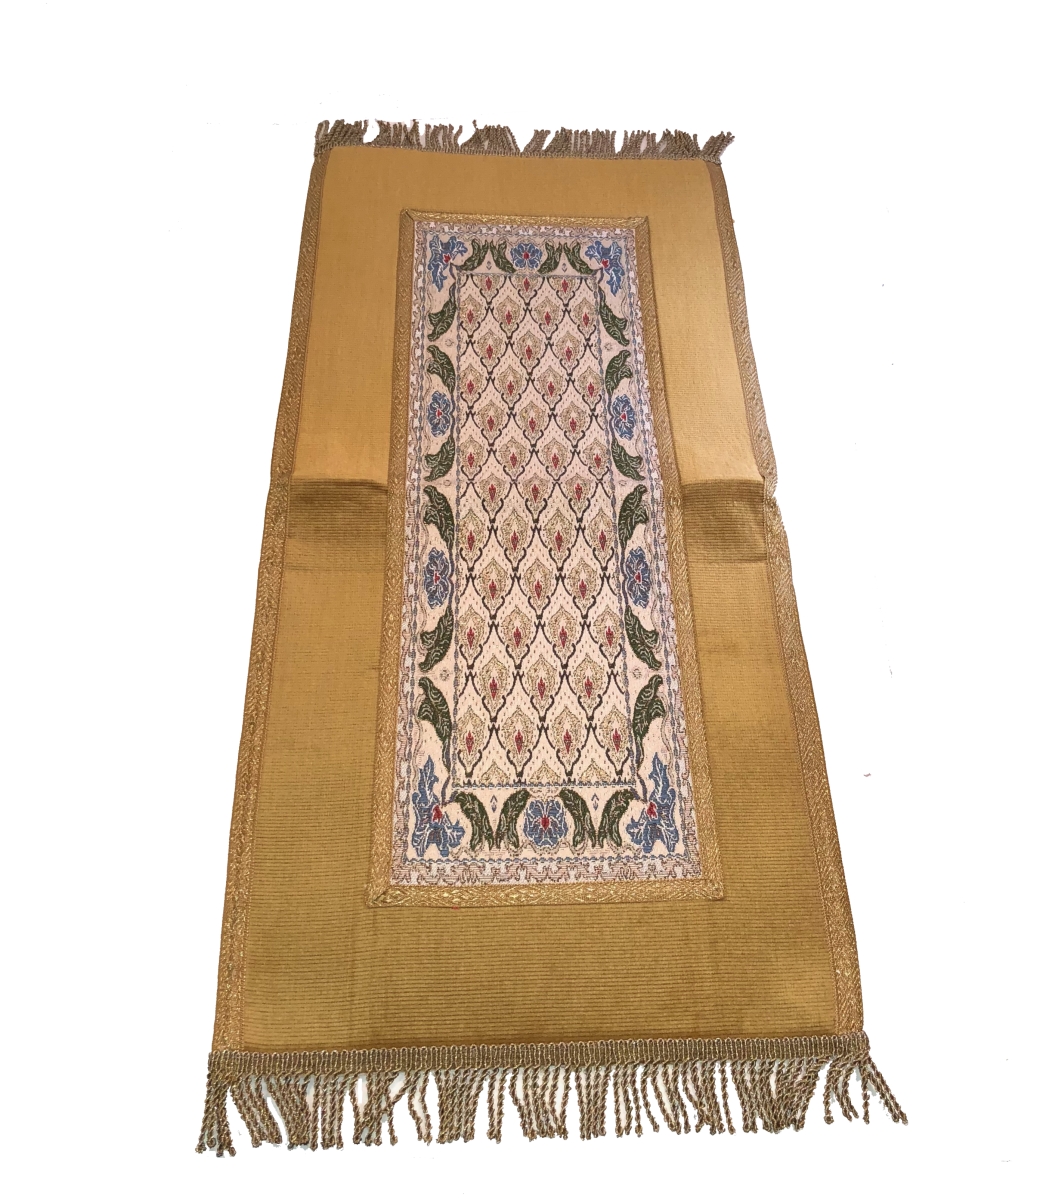 Fou1270gld 12 X 70 Belgium Fouquete Table Runner, Gold